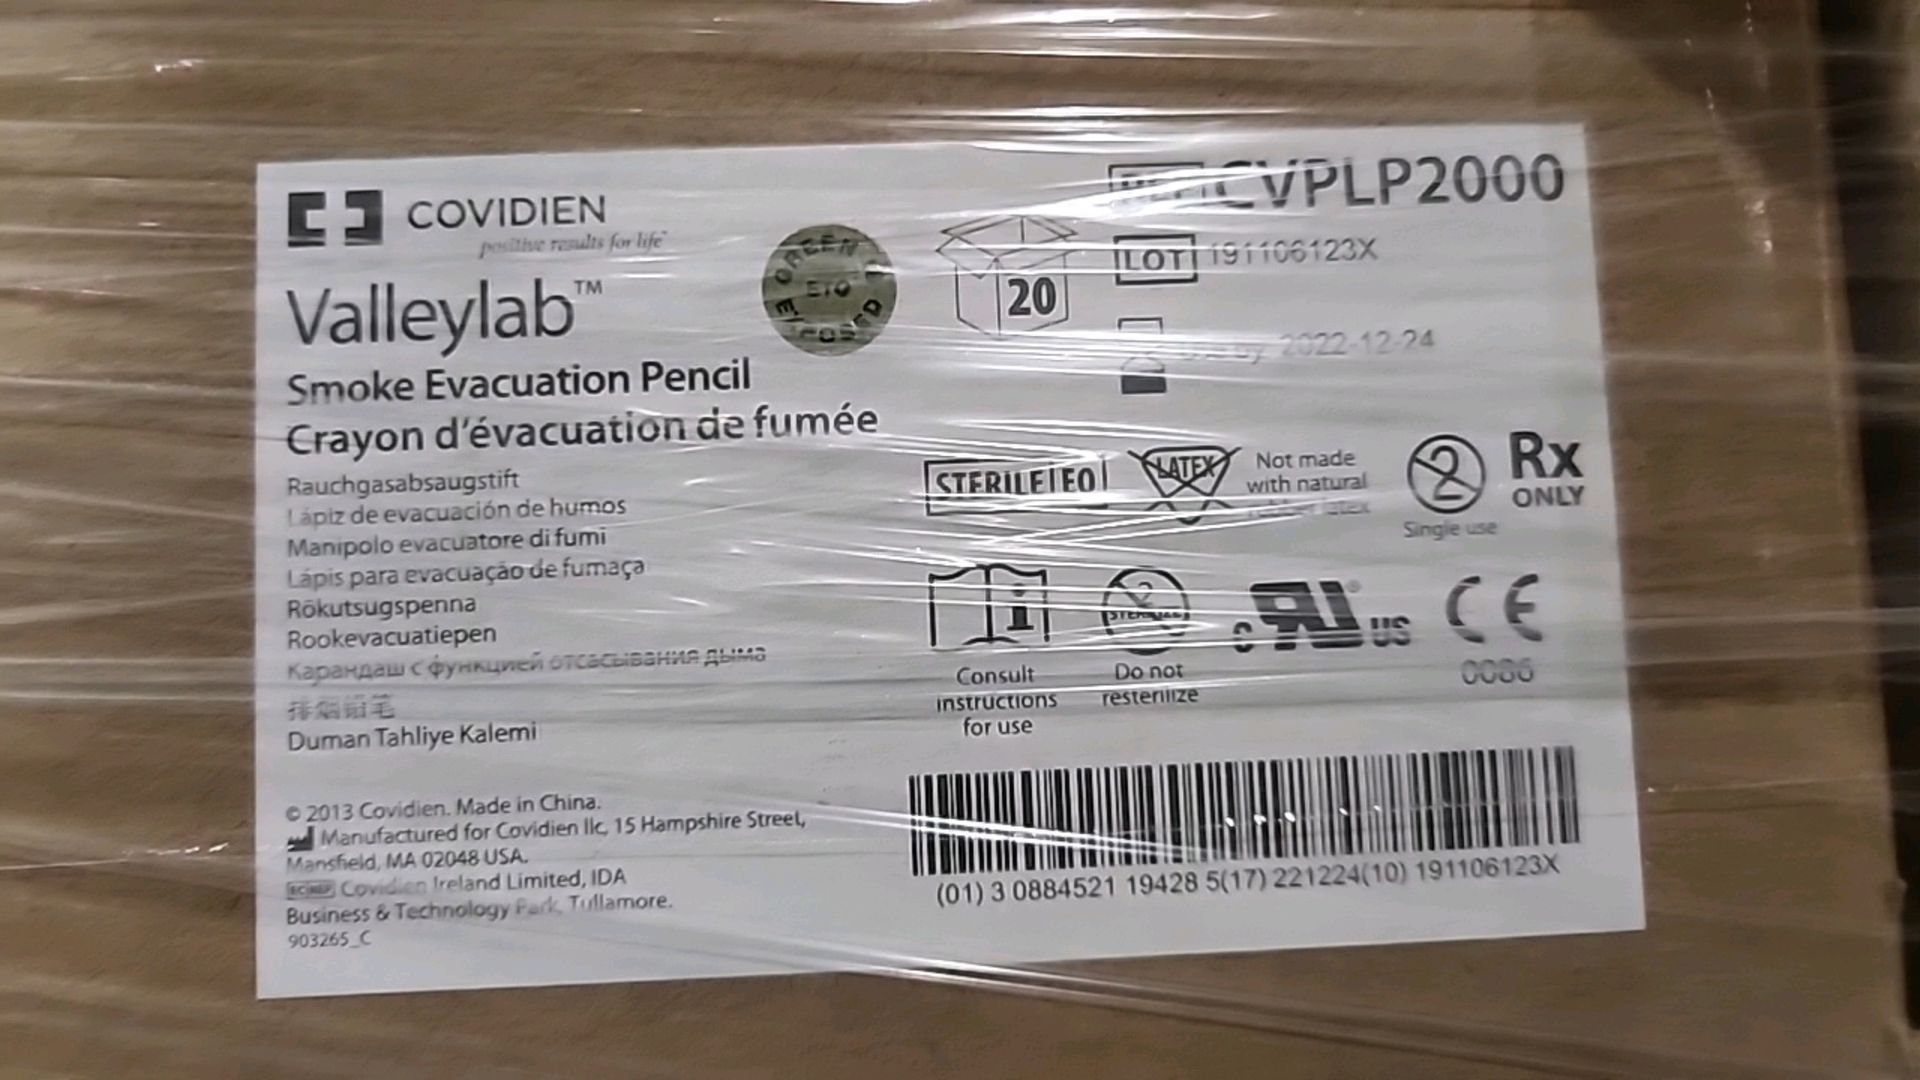 COVIDIEN VALLEYLAB REF CVPLP2000 SMOKE EVACUATION PENCIL (NOT IN DATE) LOCATION: 100 GOLDEN DR. - Image 4 of 4